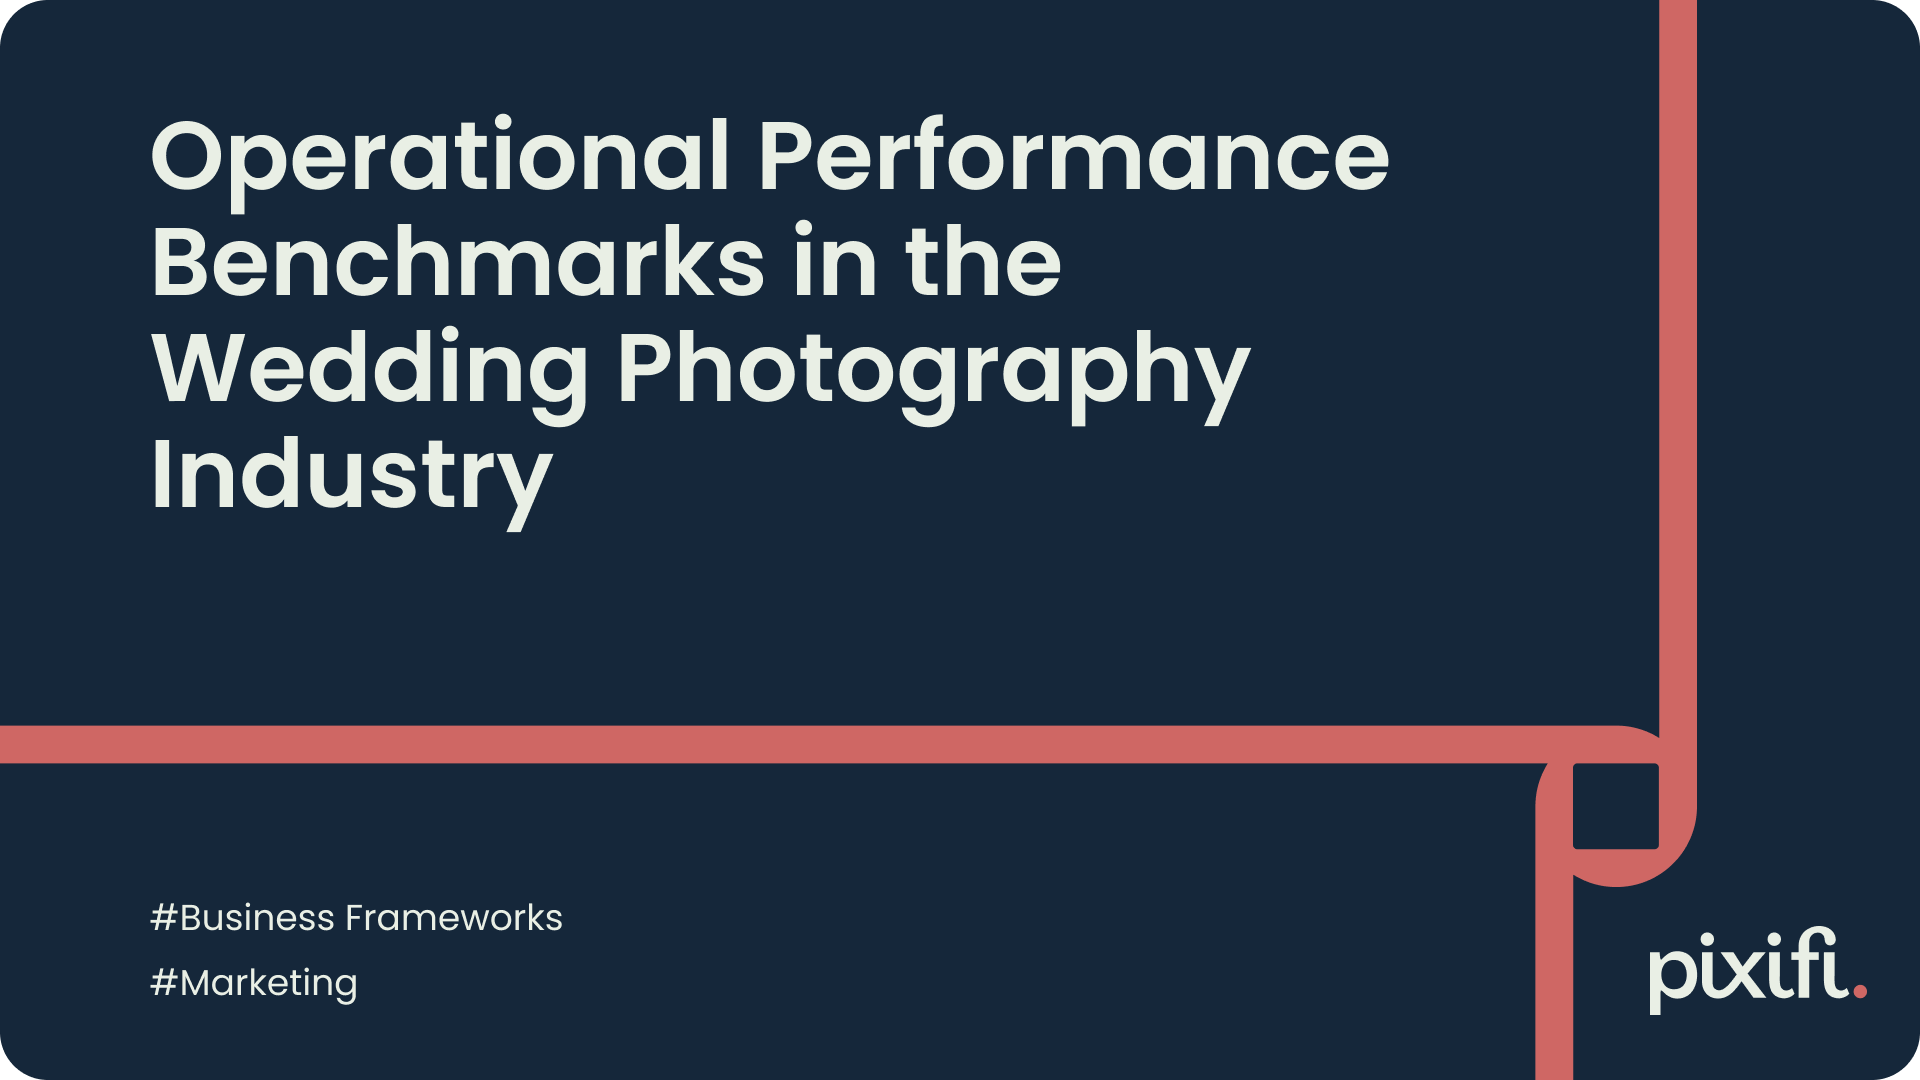 Operational Performance Benchmarks in the Wedding Photography Industry